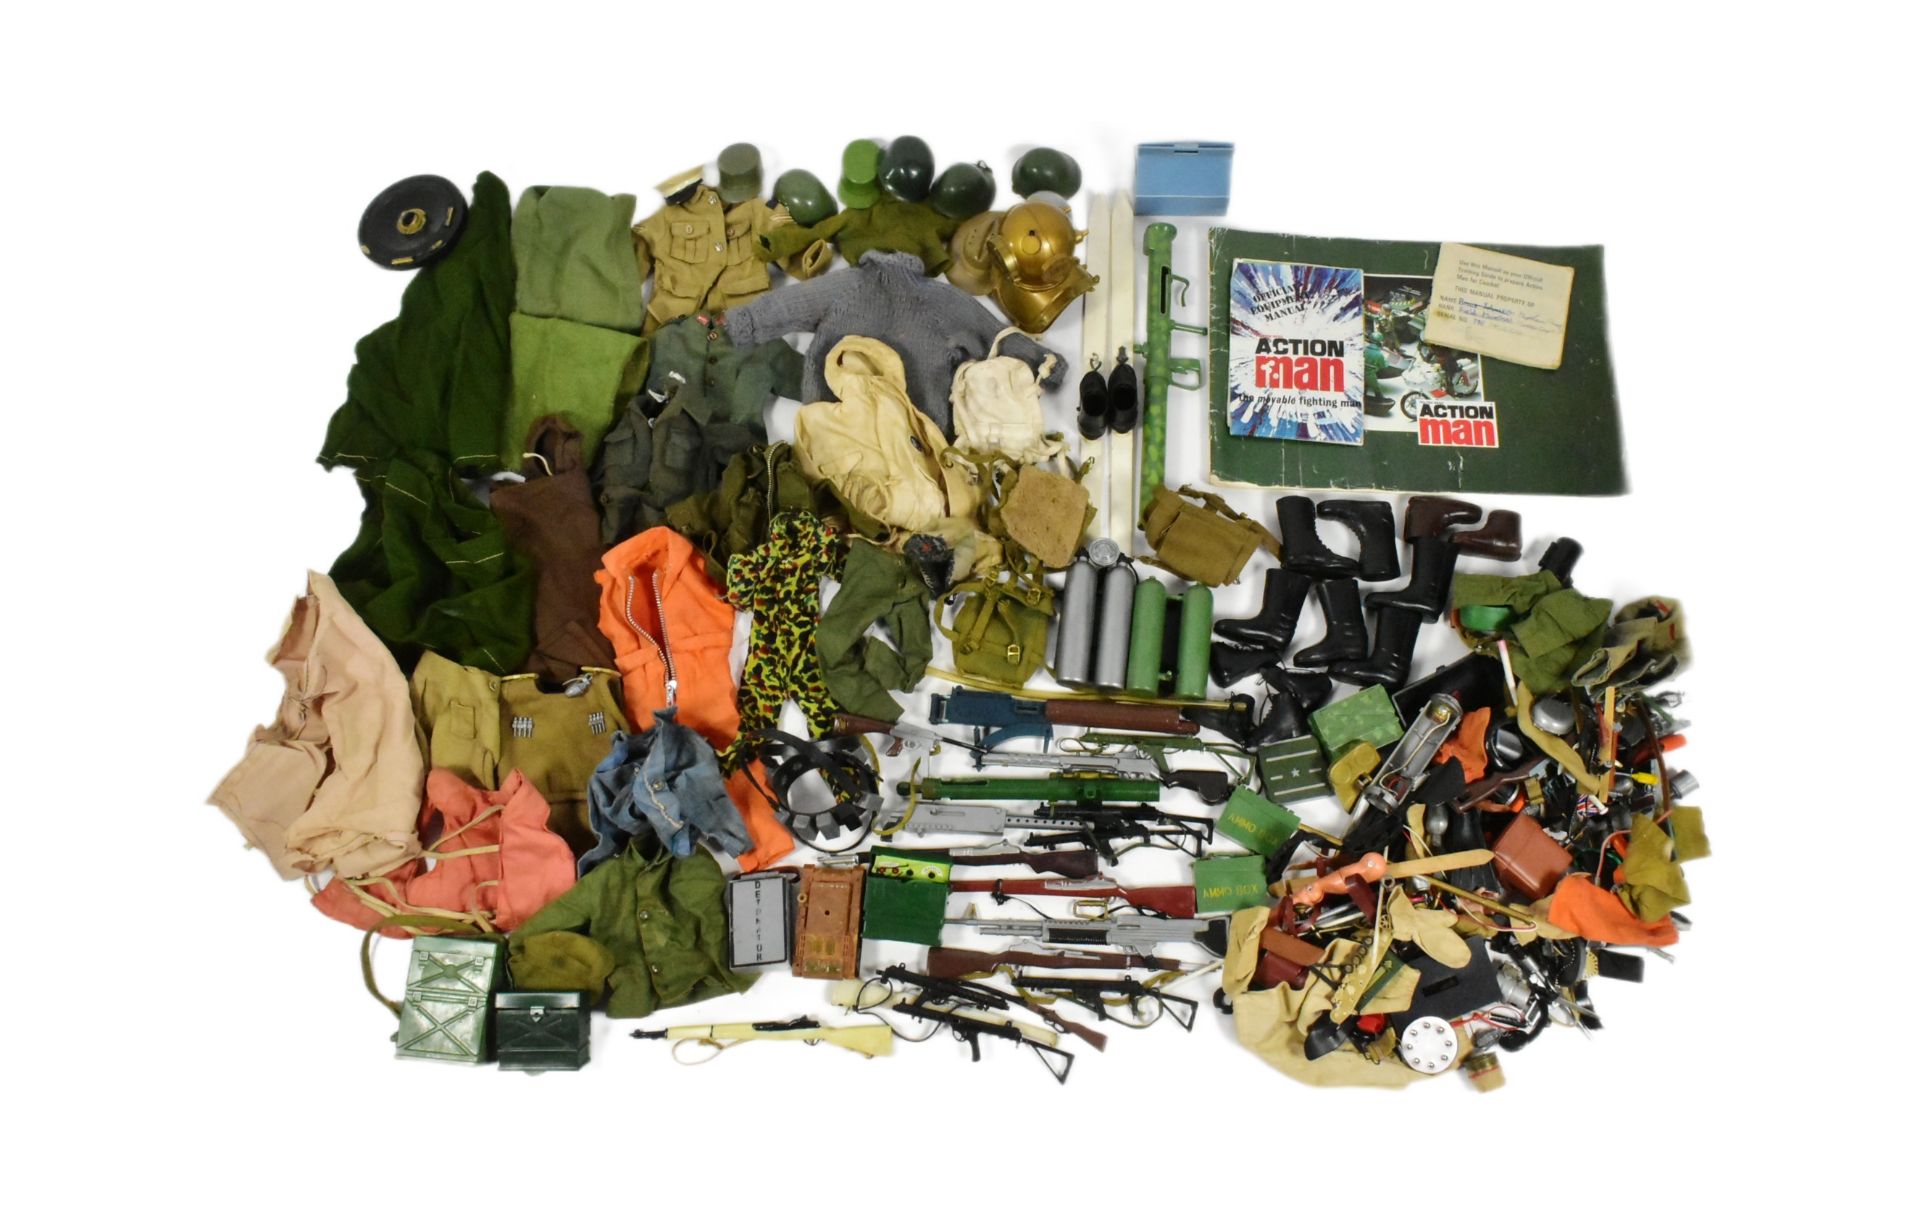 ACTION MAN - PALITOY - COLLECTION OF ACCESSORIES